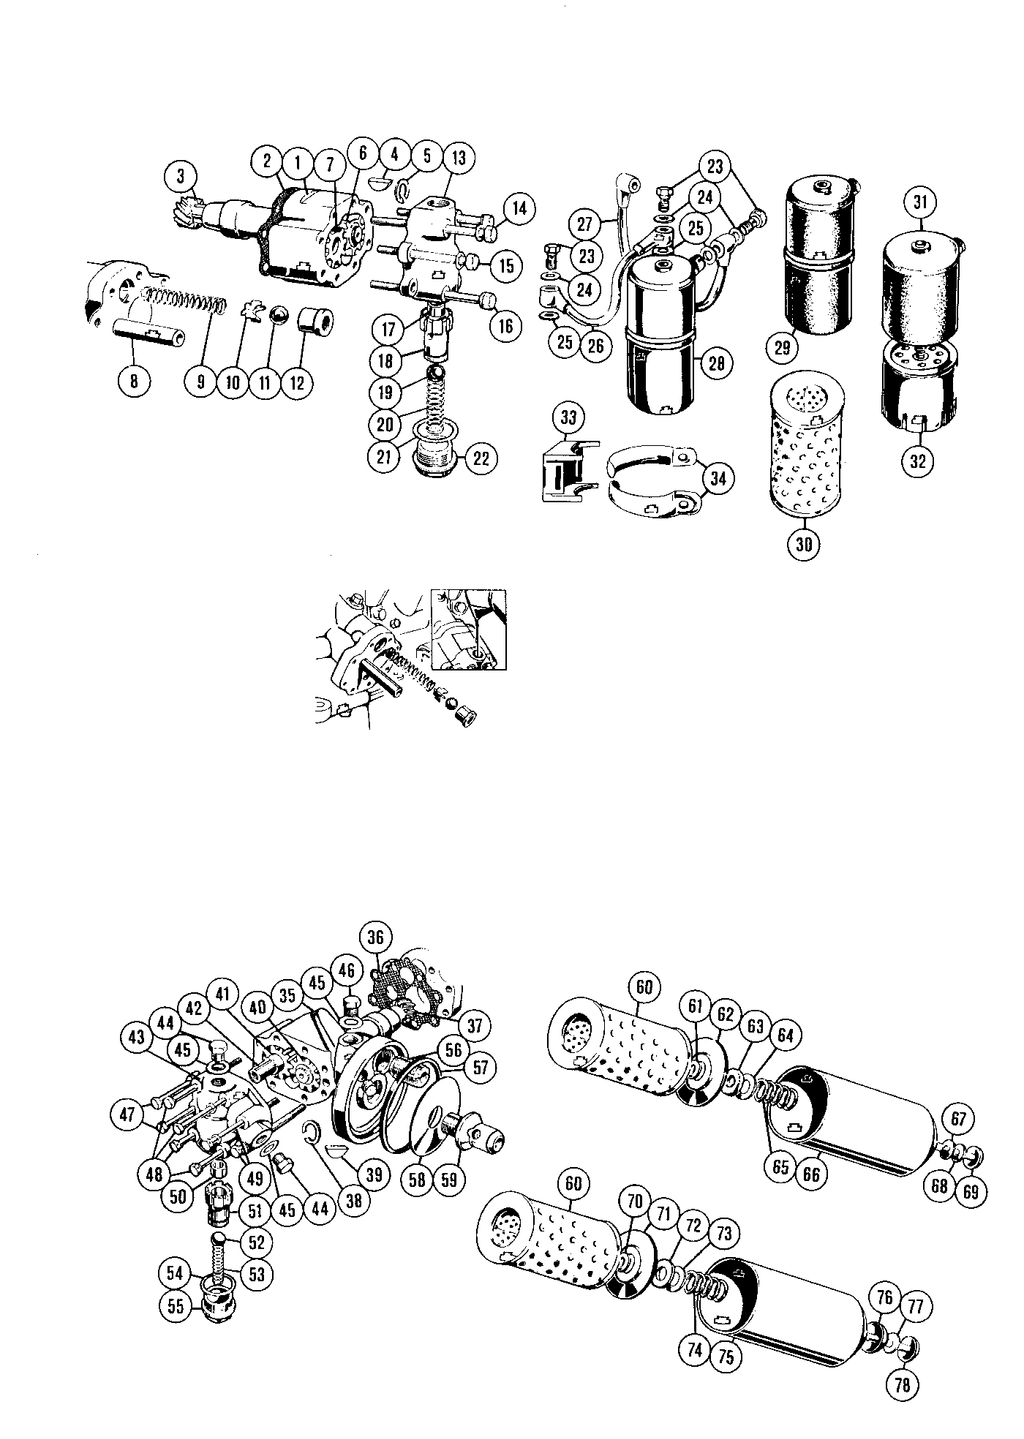 MGTD-TF 1949-1955 - Oil pumps | Webshop Anglo Parts - Oil pumps & filters - 1